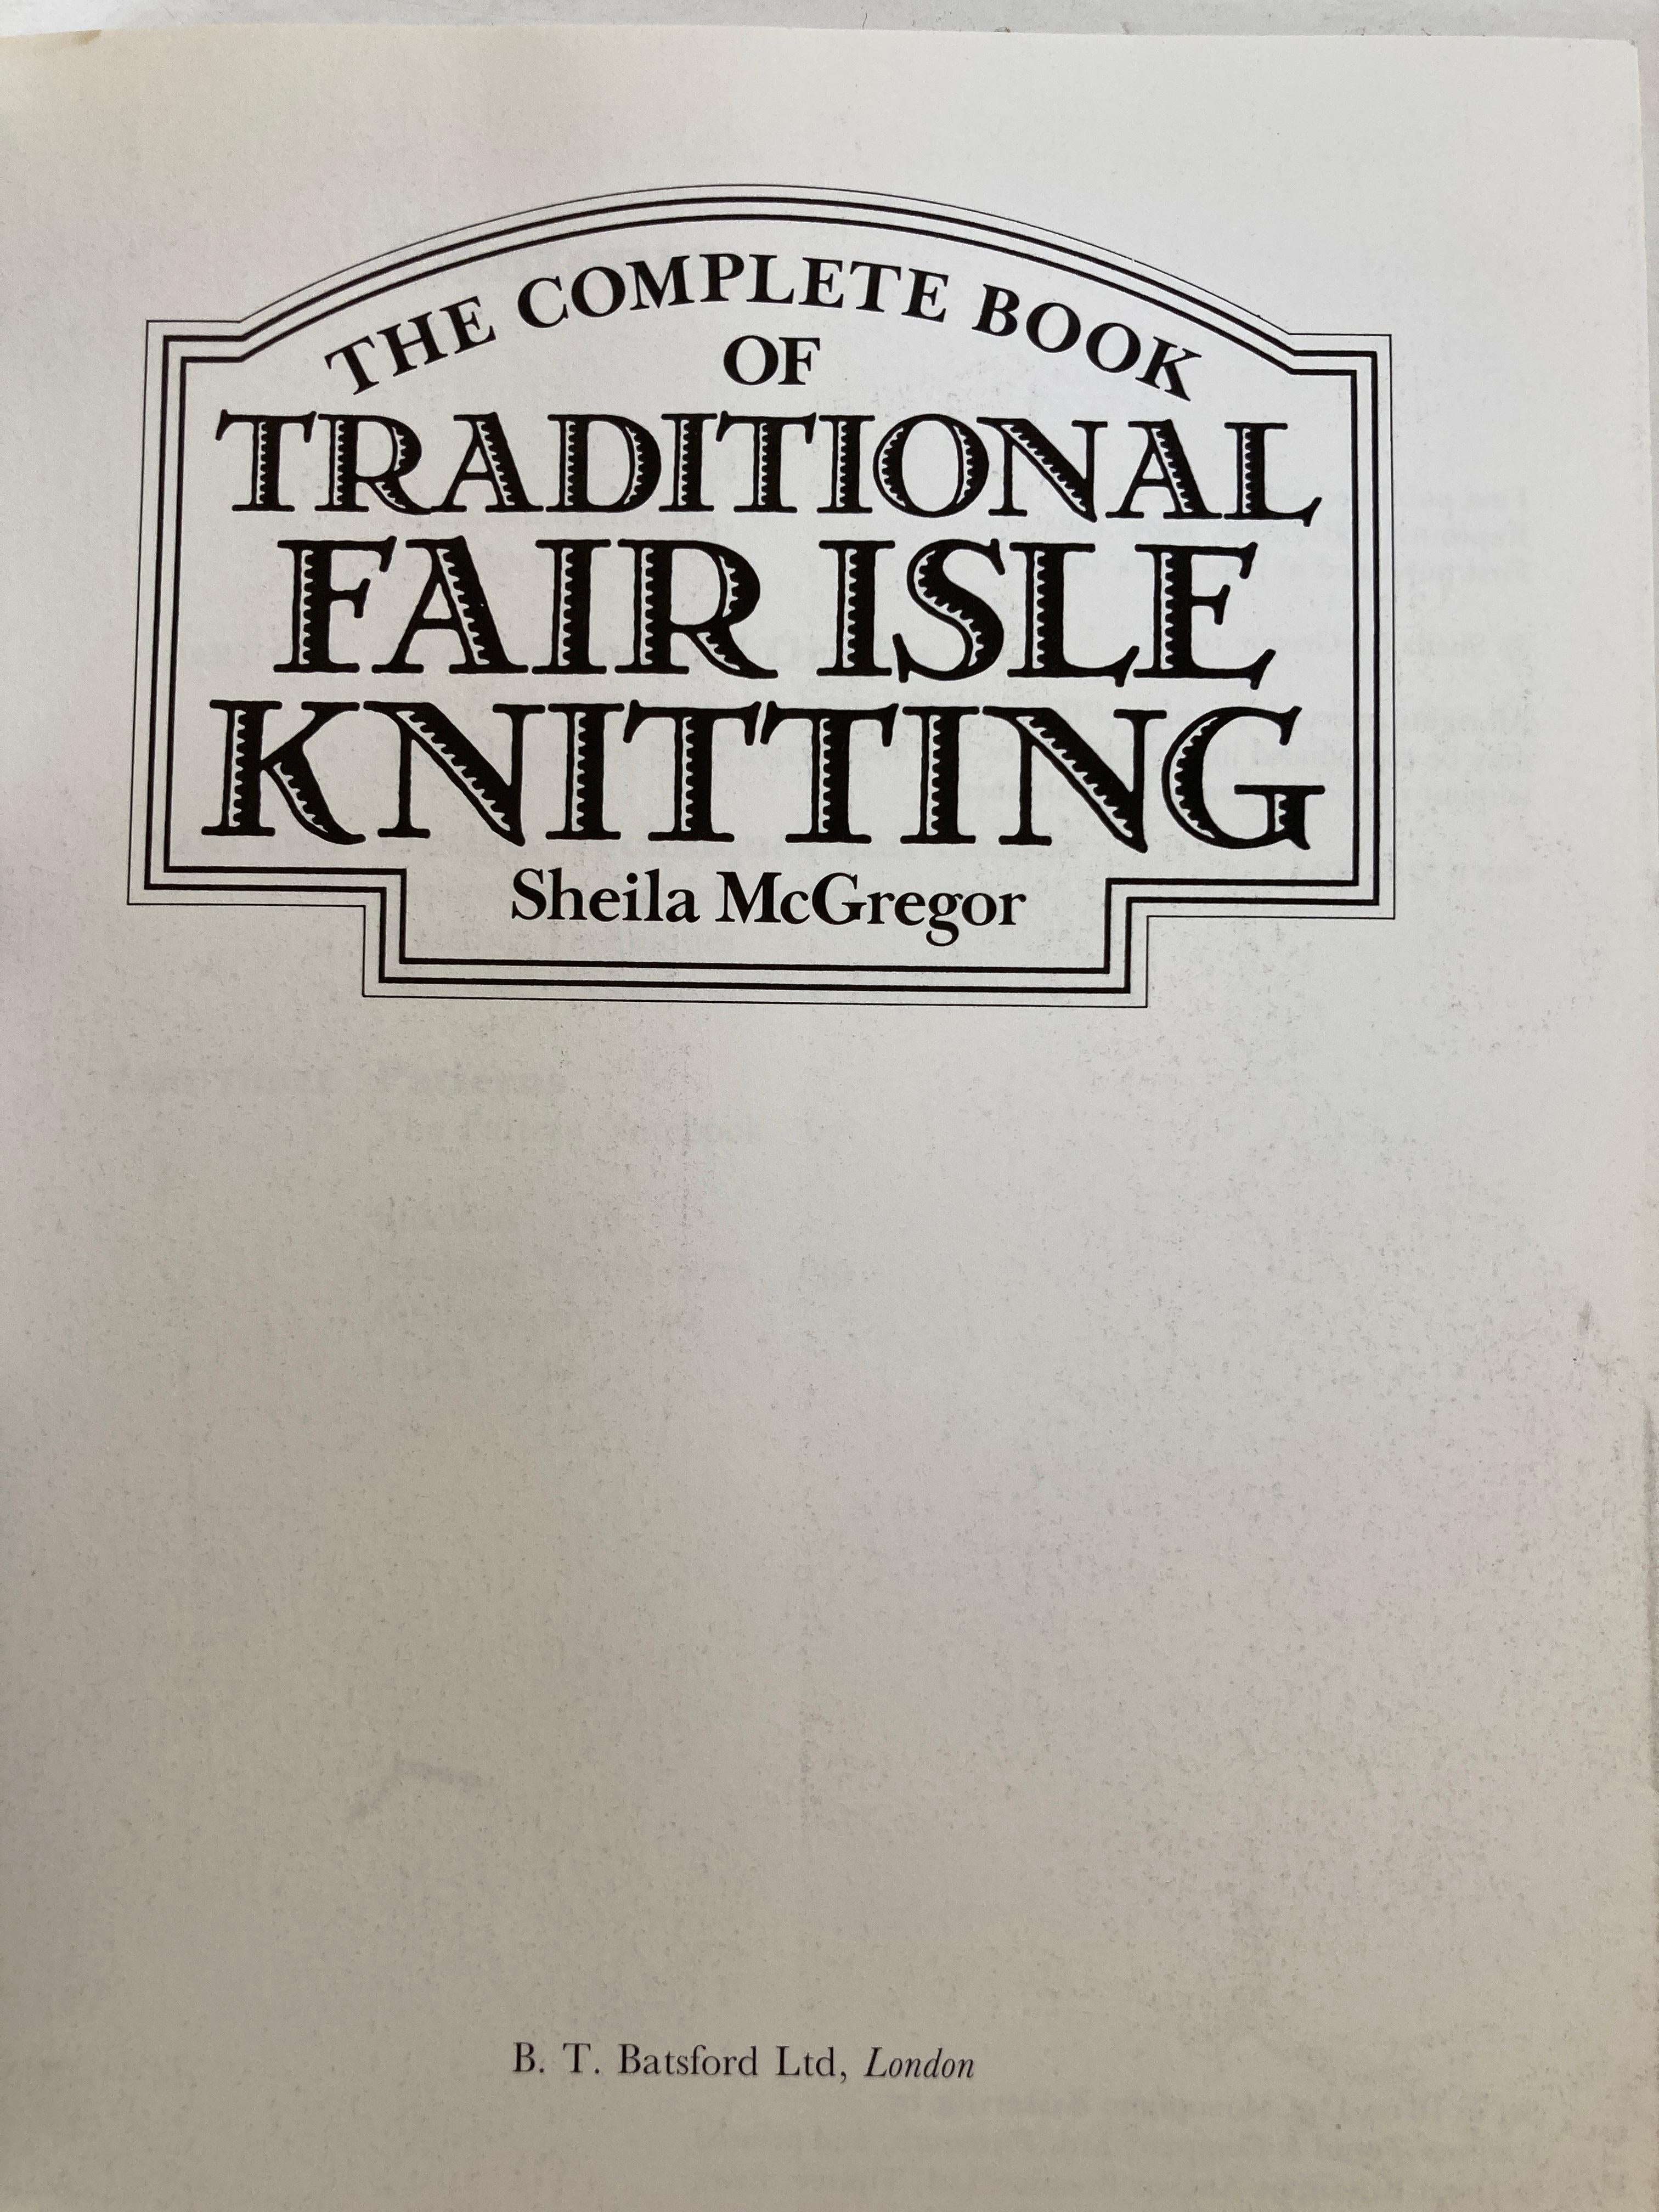 Complete Book of Traditional Fair Isle Knitting by McGregor, Sheila, 1982 In Good Condition For Sale In North Hollywood, CA